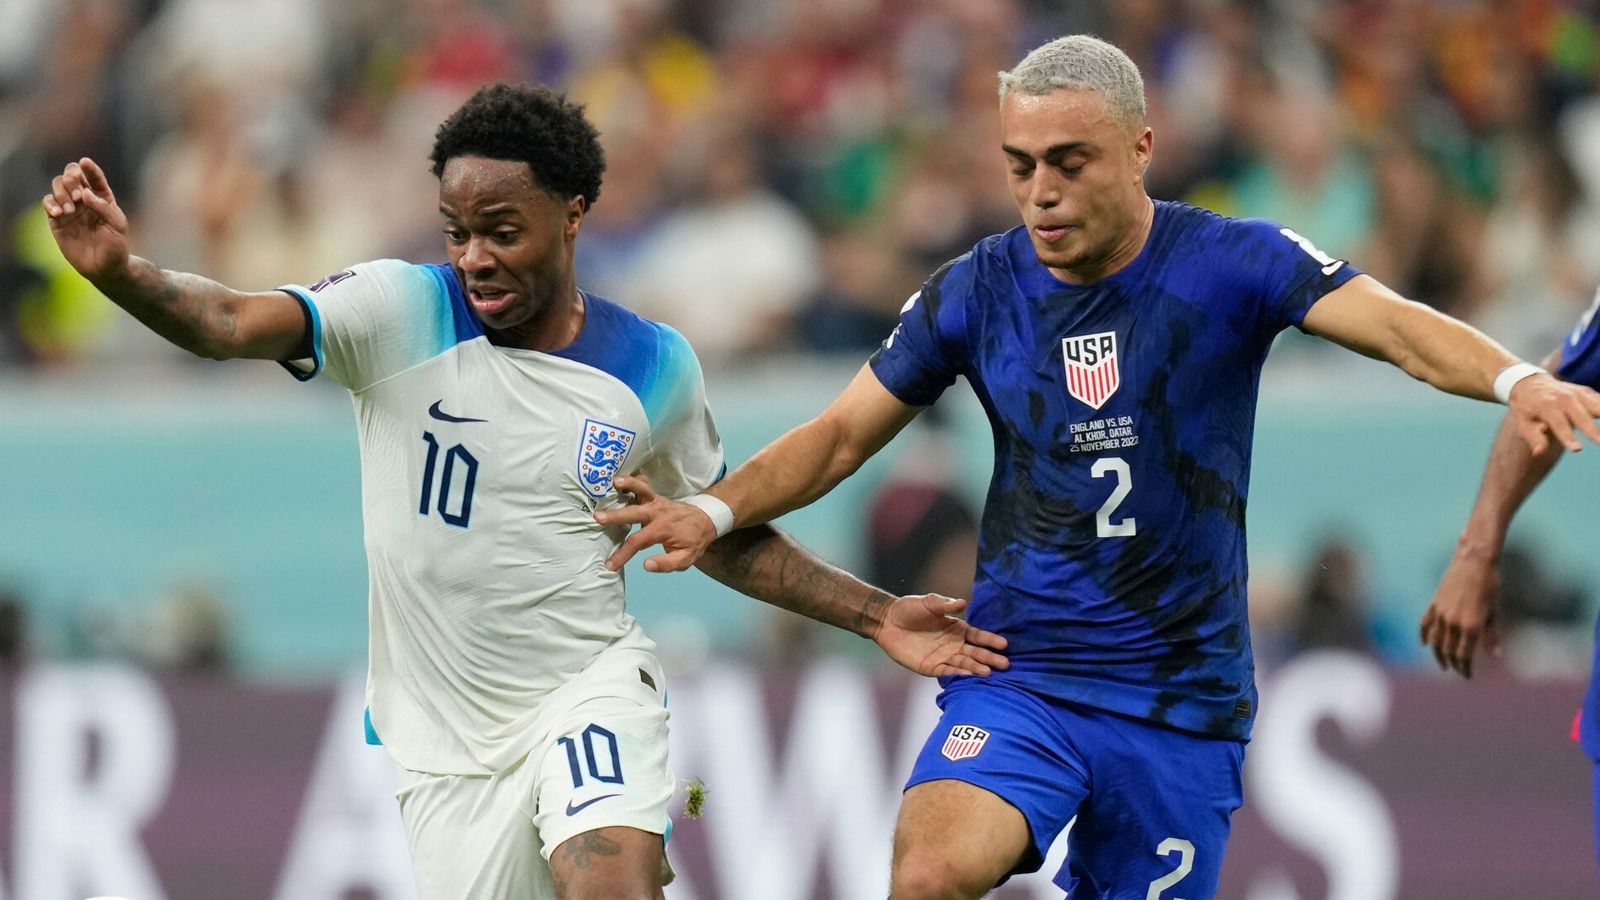 England 0-0 USA: Three Lions lack intensity in goalless draw with Americans in Group B clash in Qatar | Football News